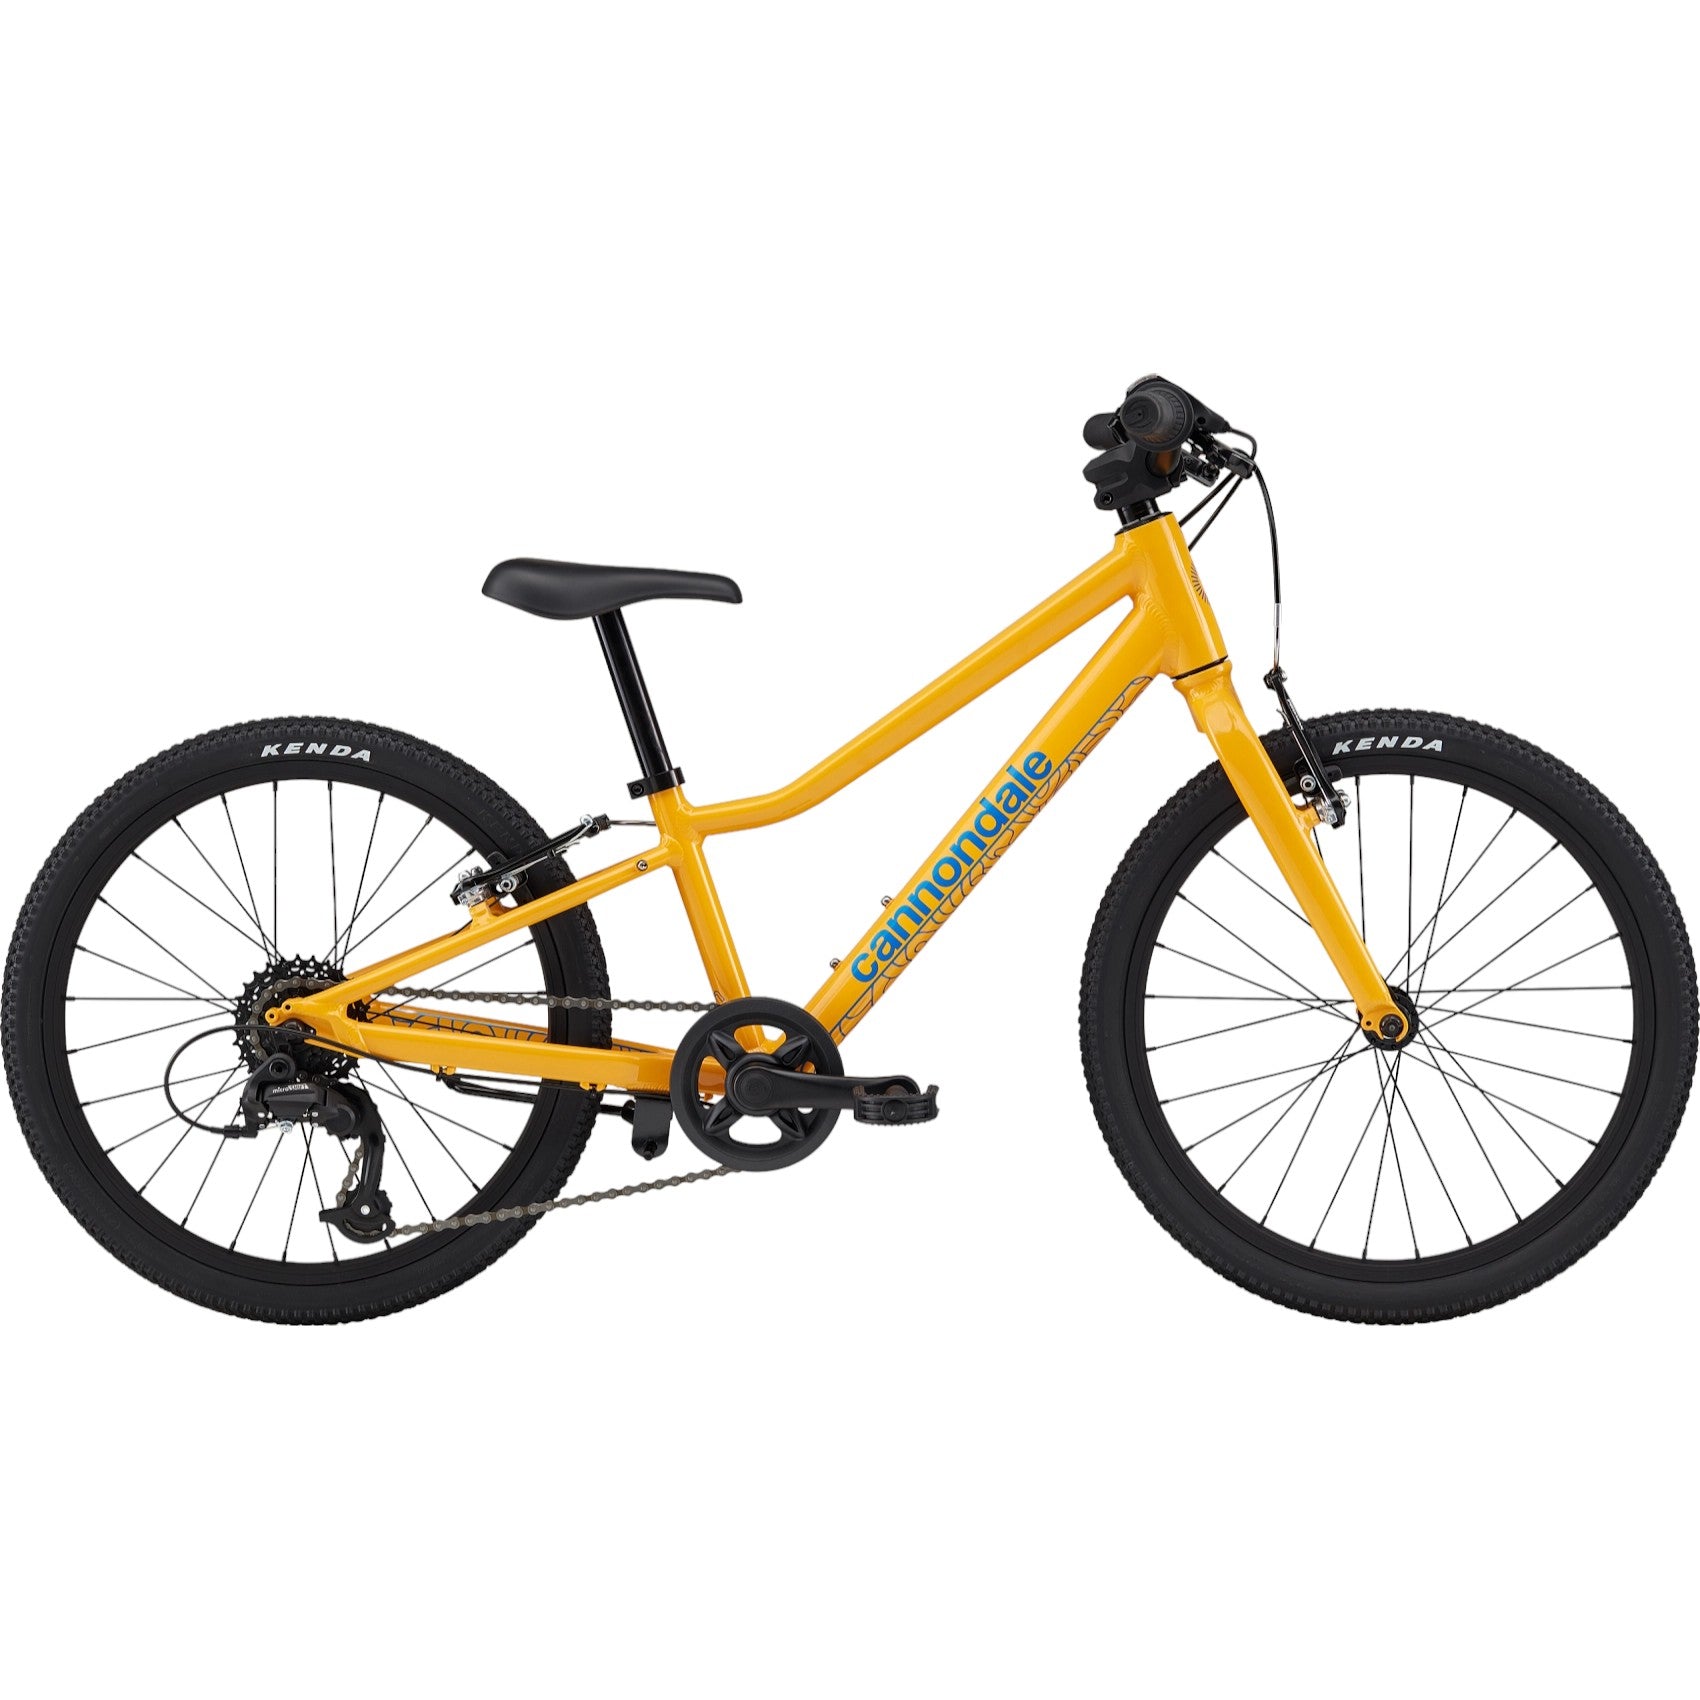 Cannondale Kids Quick 20 | Strictly Bicycles – Strictly Bicycles